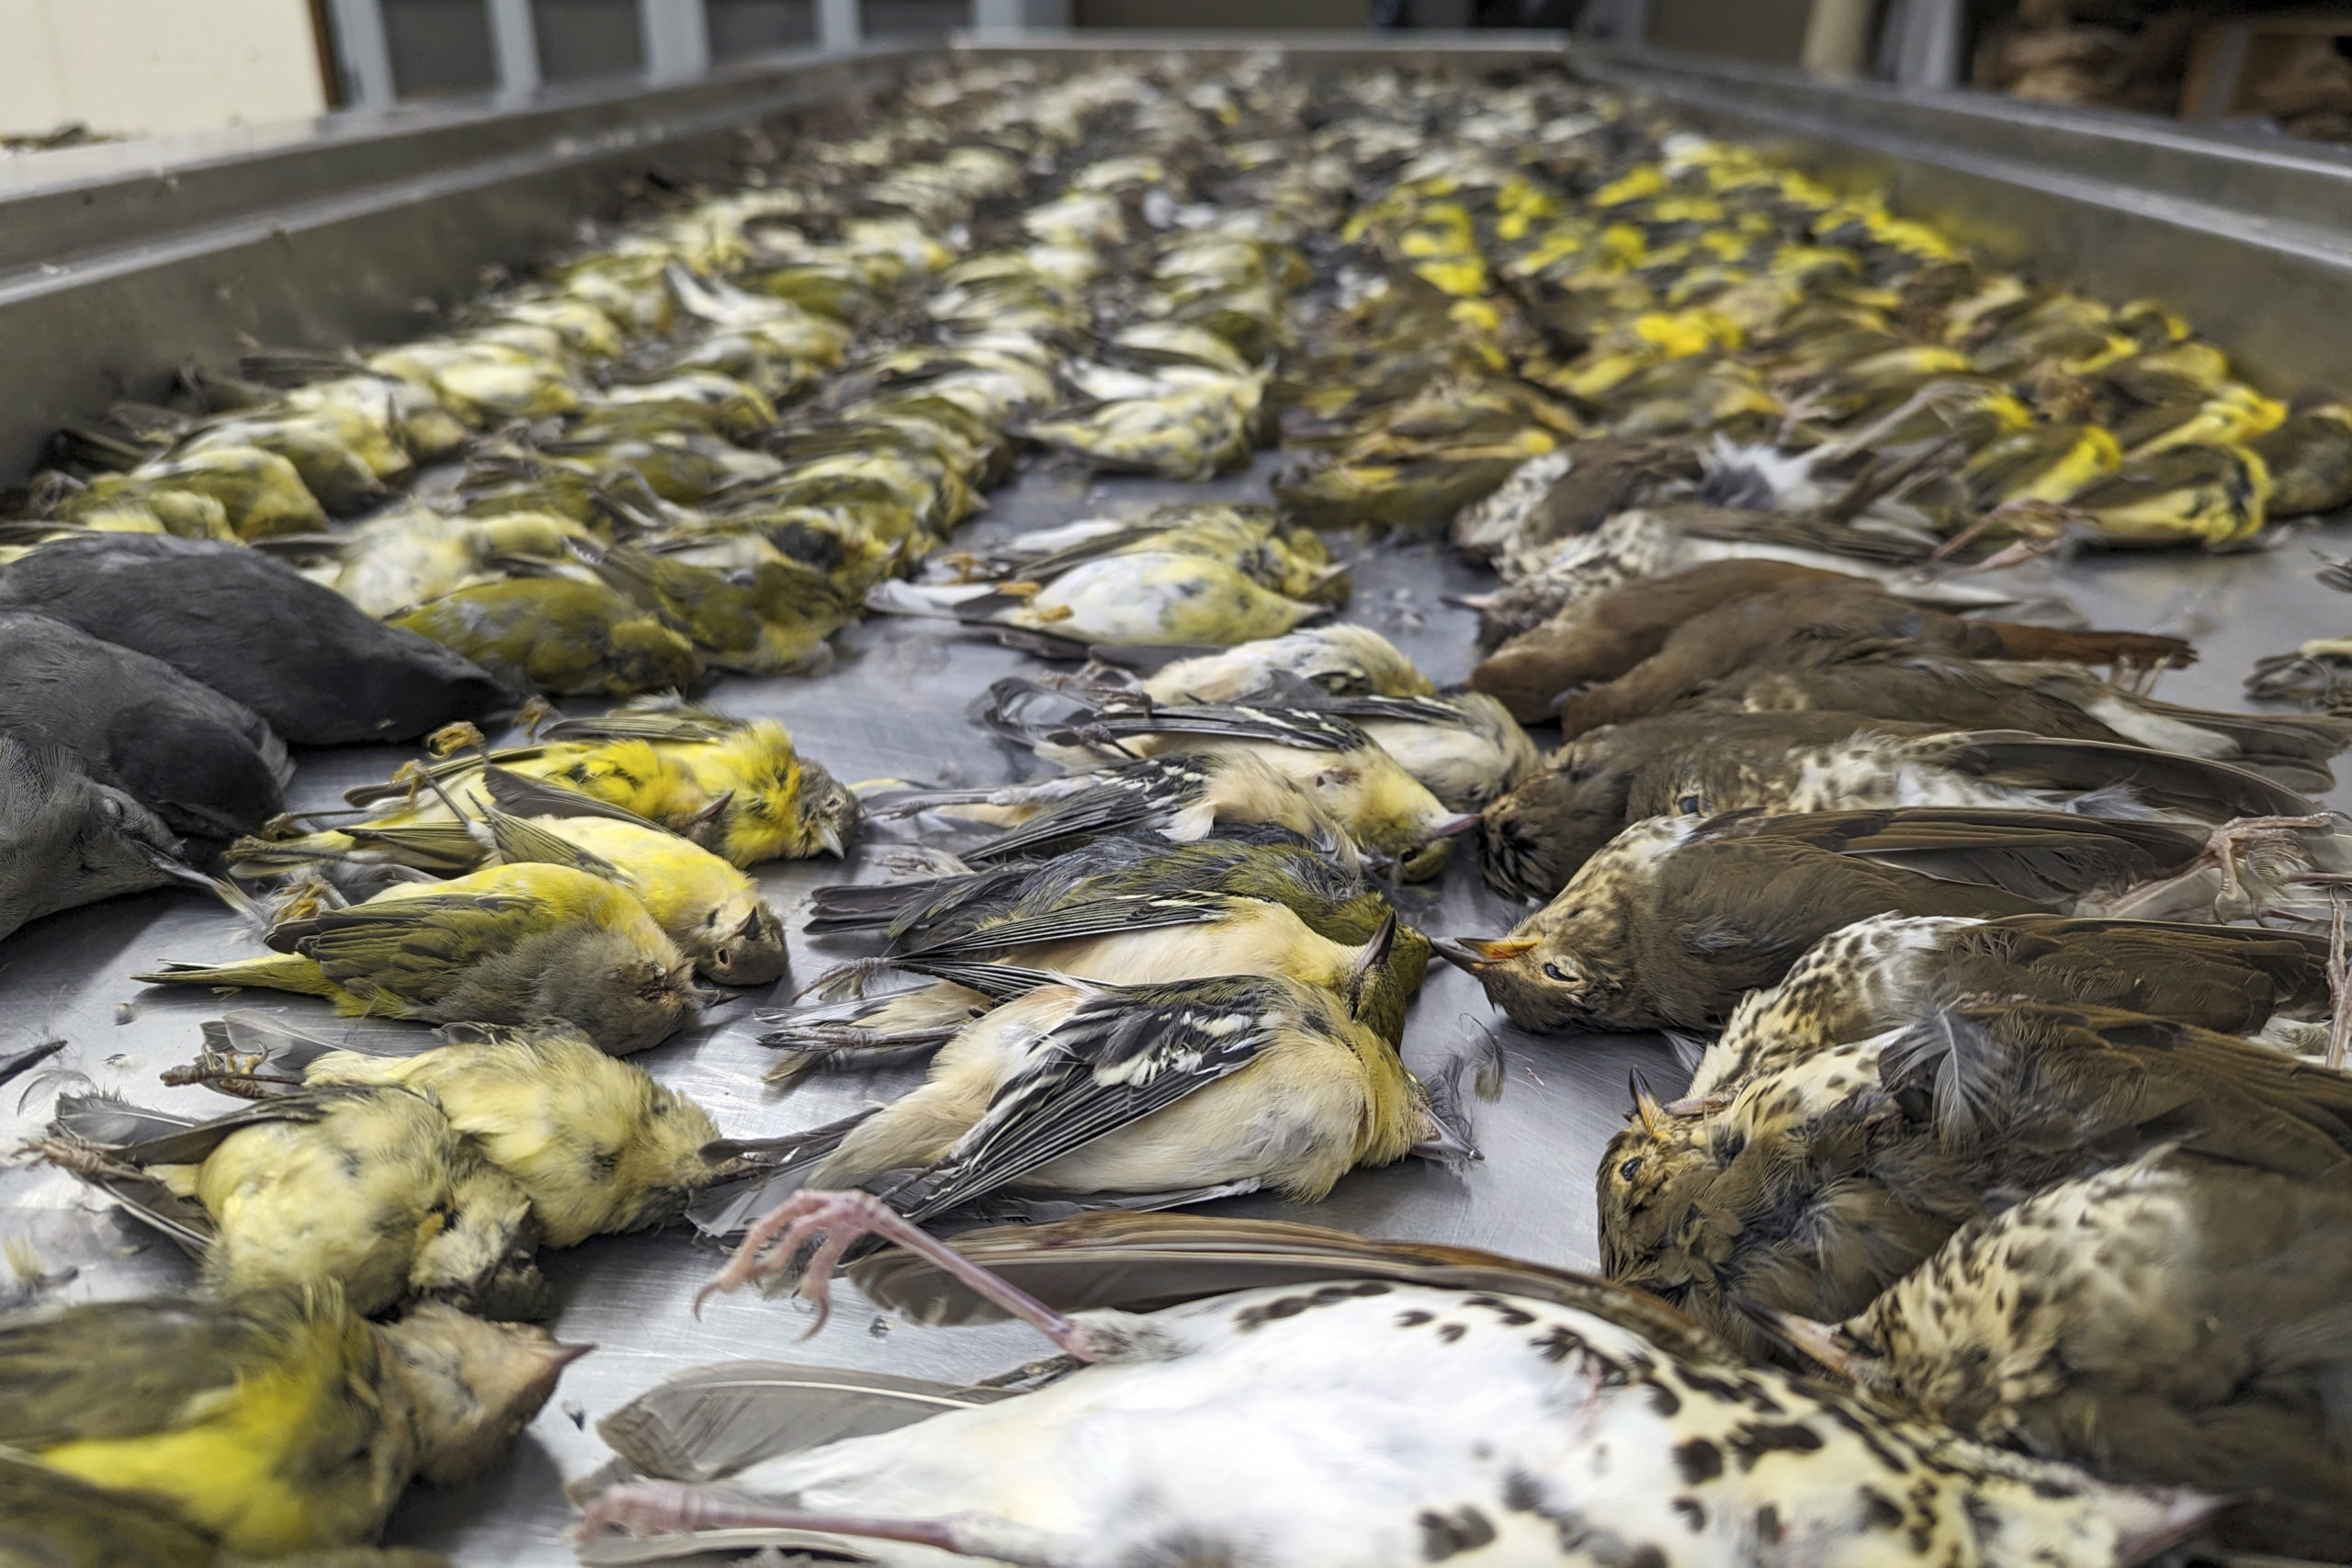 In this image provided by the Chicago Field Museum, the bodies of migrating birds are displayed at the museum on Thursday. The birds were killed when they flew into the windows of the McCormick Place Lakeside Center.